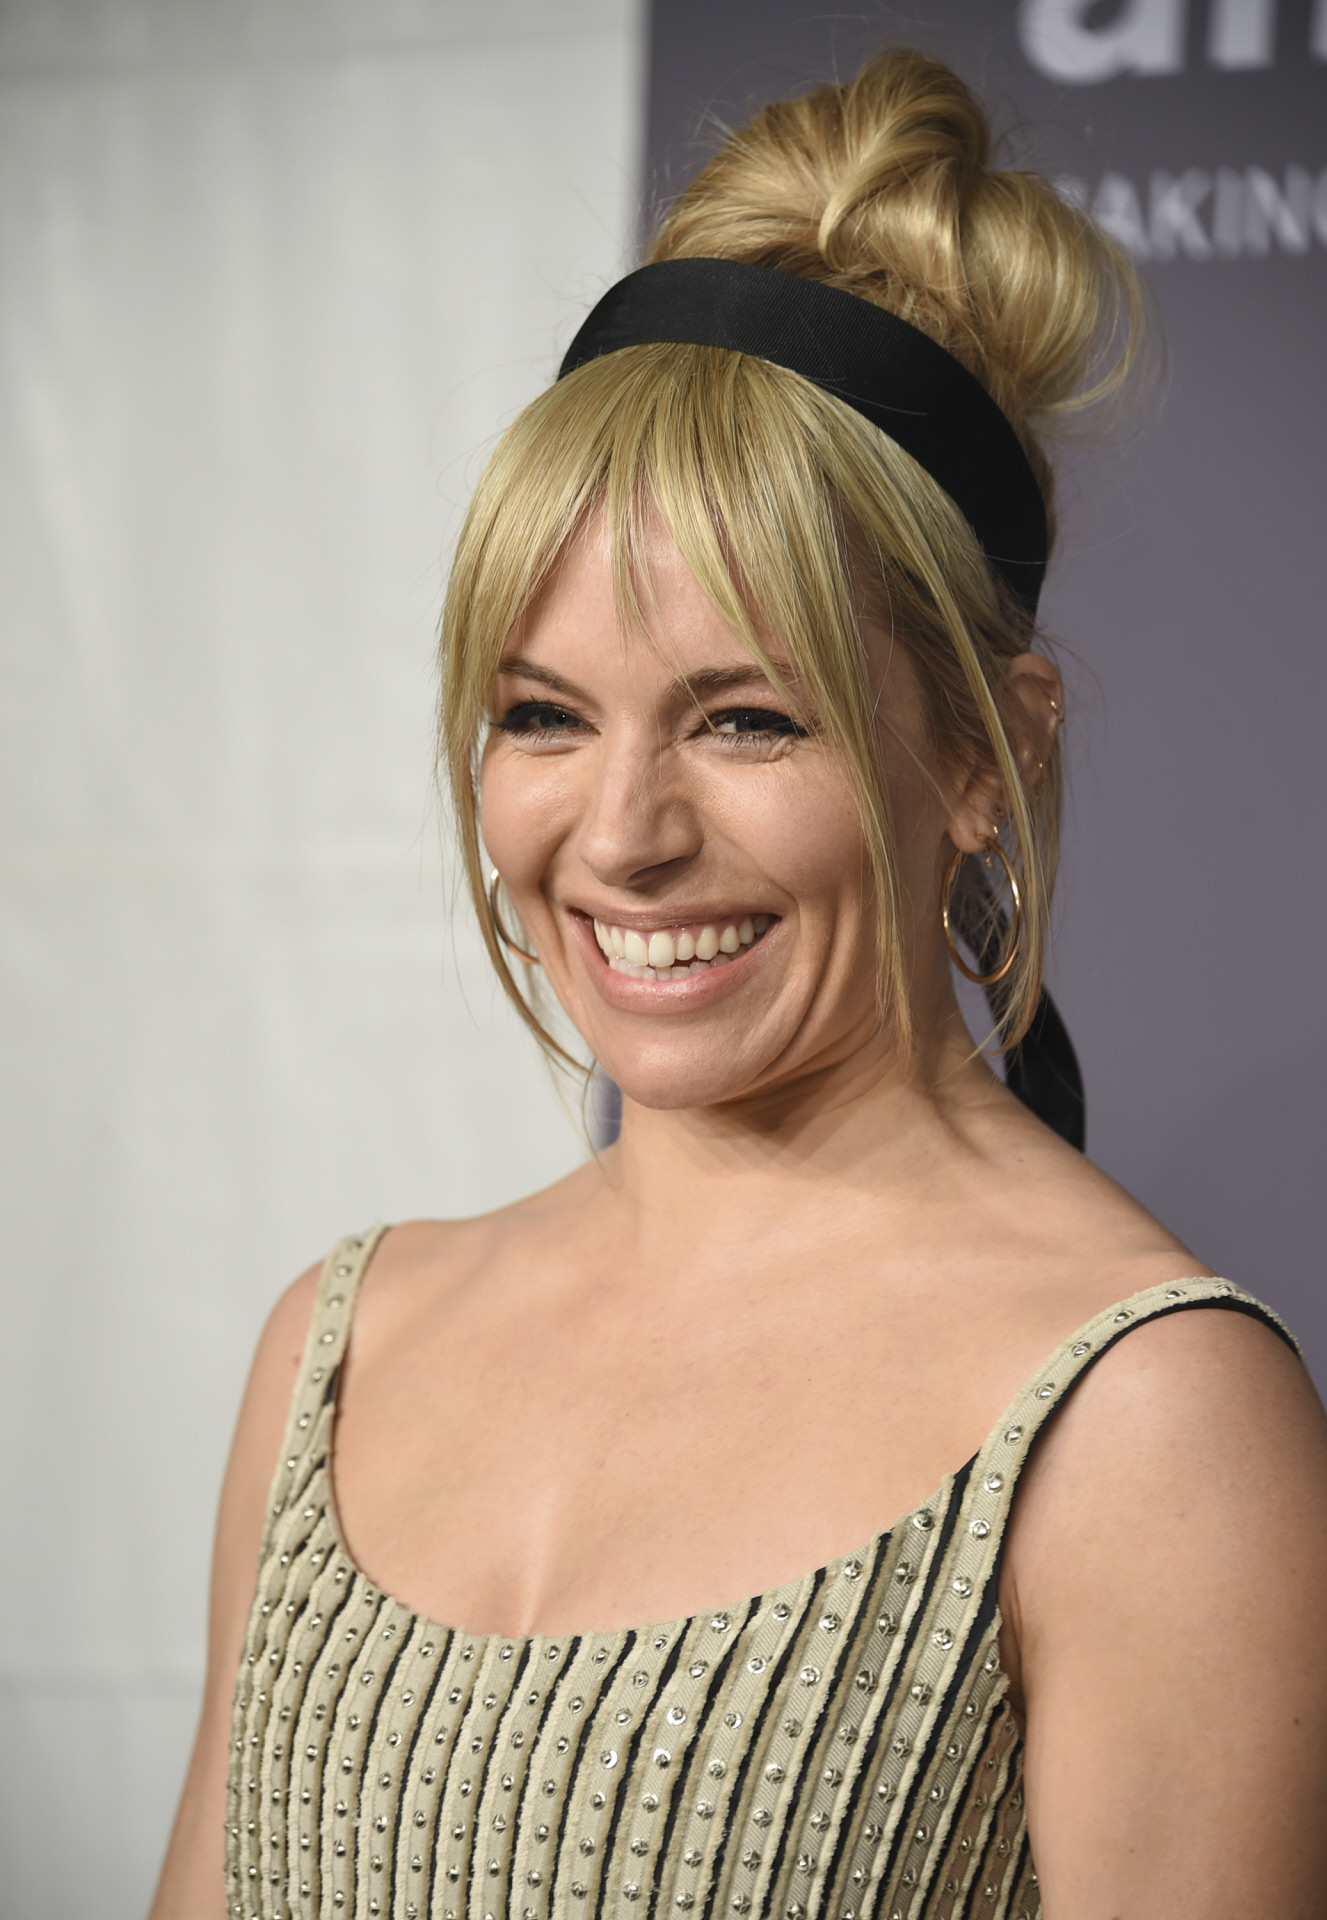 Sienna Miller with curtain bangs and headband.